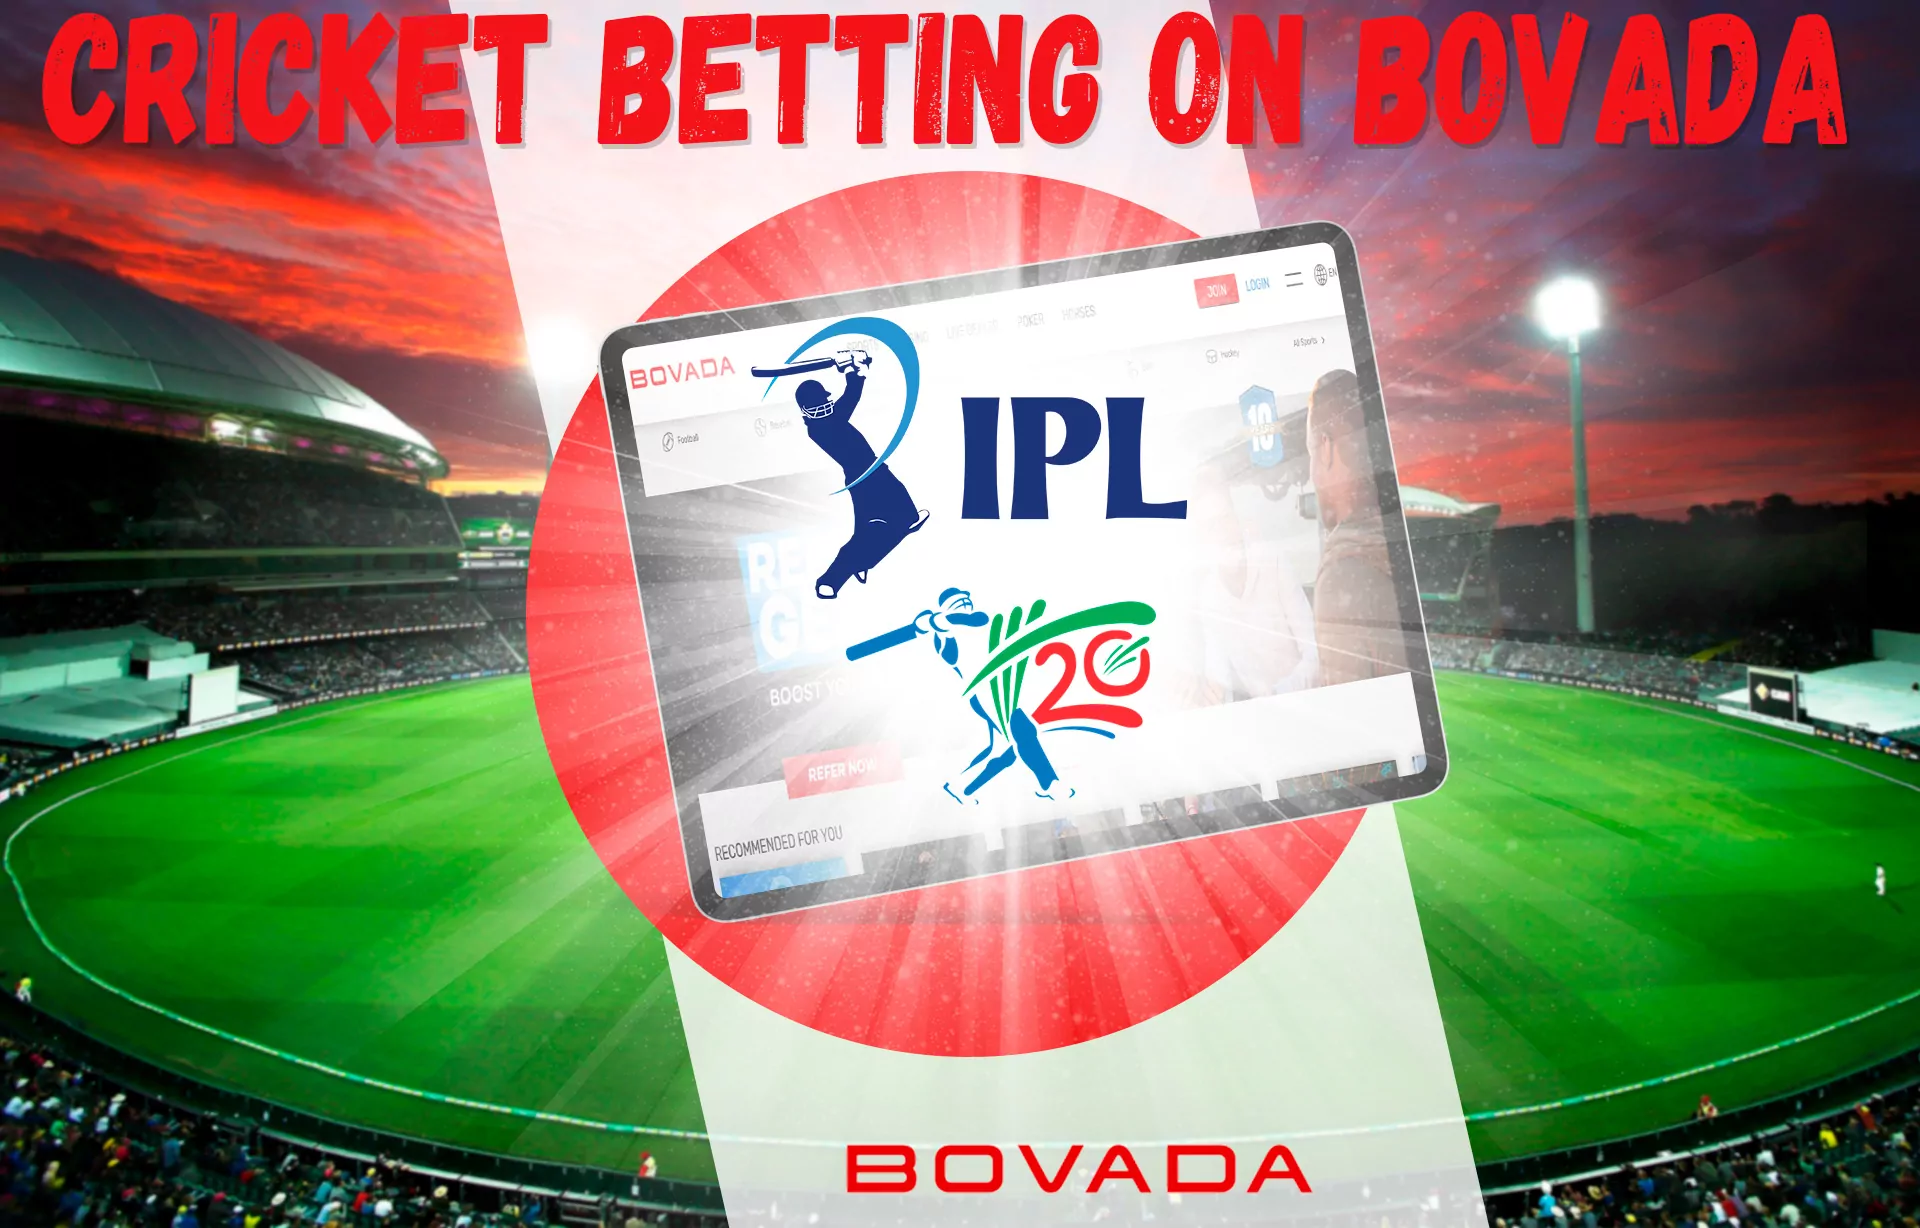 In the cricket betting section, players have the opportunity to find the most popular types of bets.